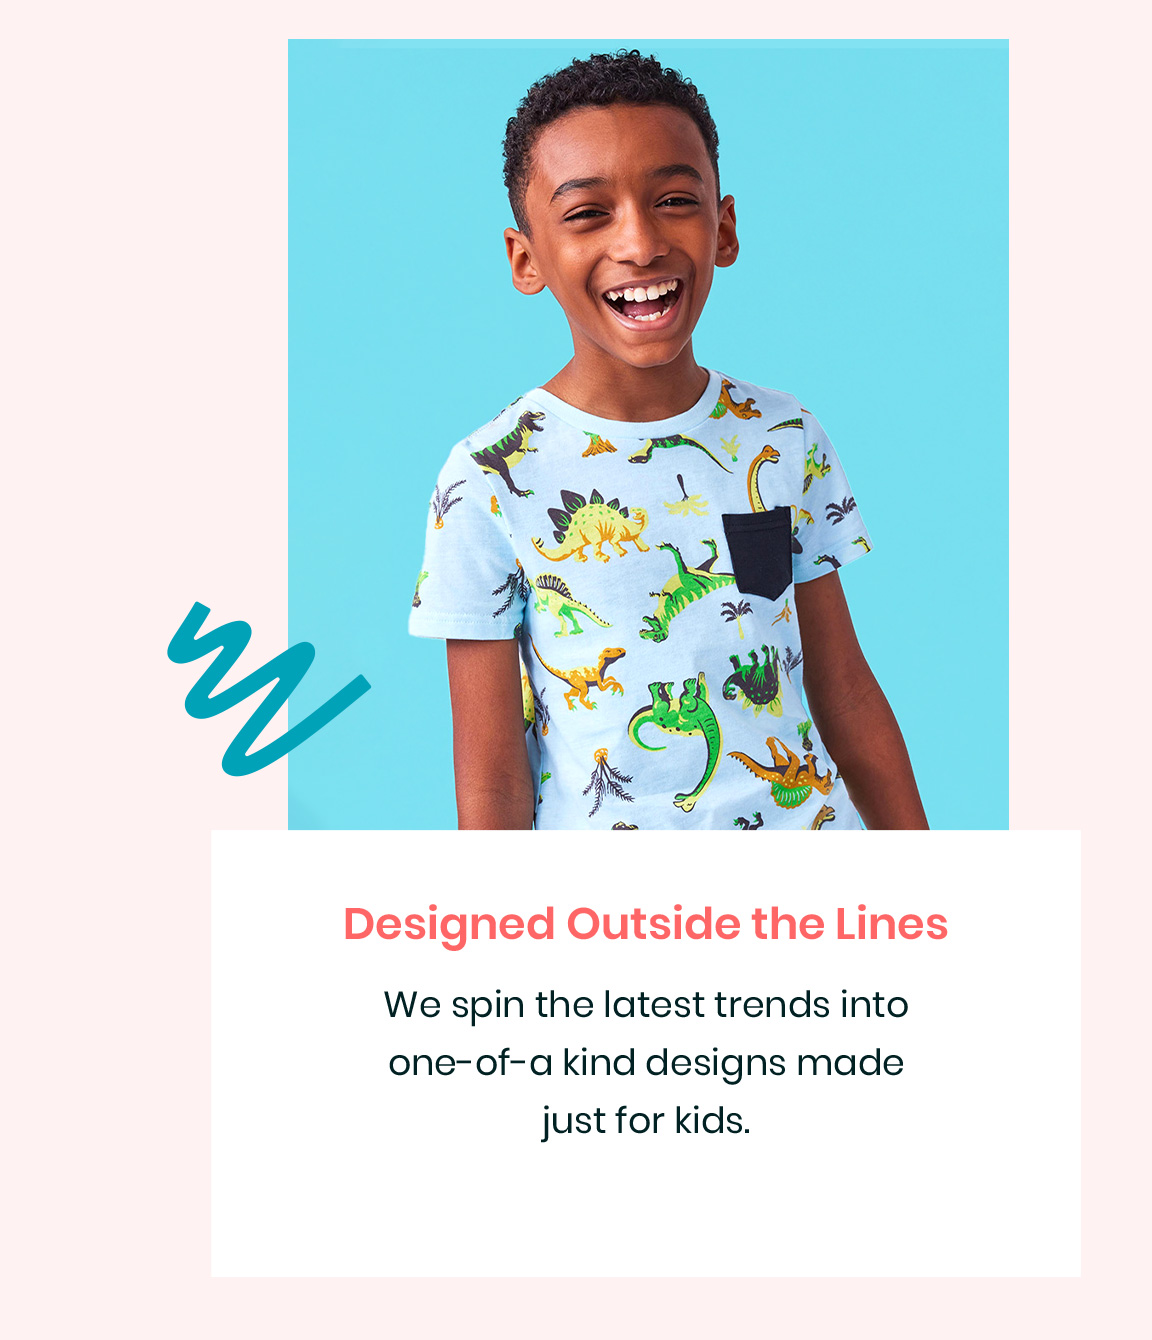 Designed Outside the Lines - We spin the lates trends into one-of-a-kind designs made just for kids.